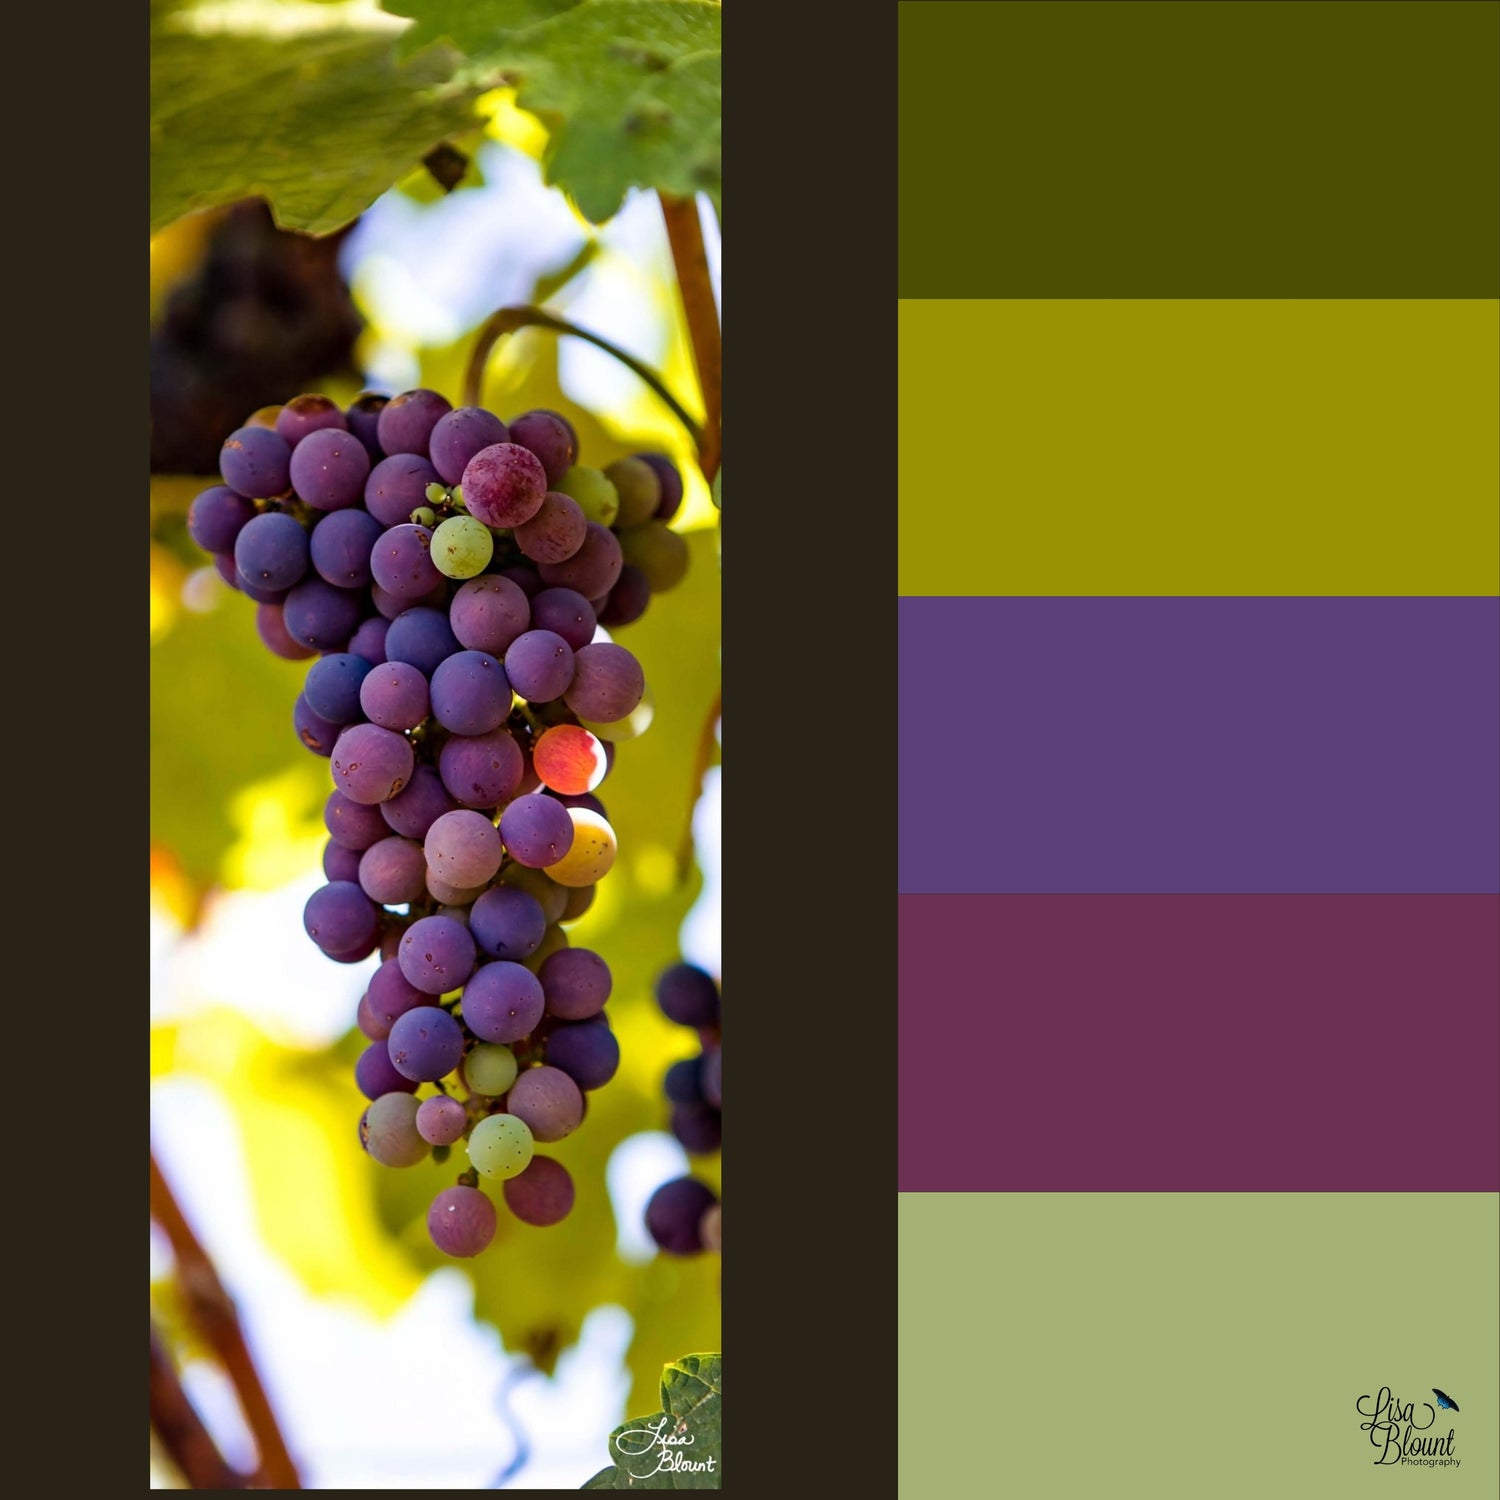 Mood boards and art blog of Napa grapes and the colors found within them of green and purple Lisa Blount photography 